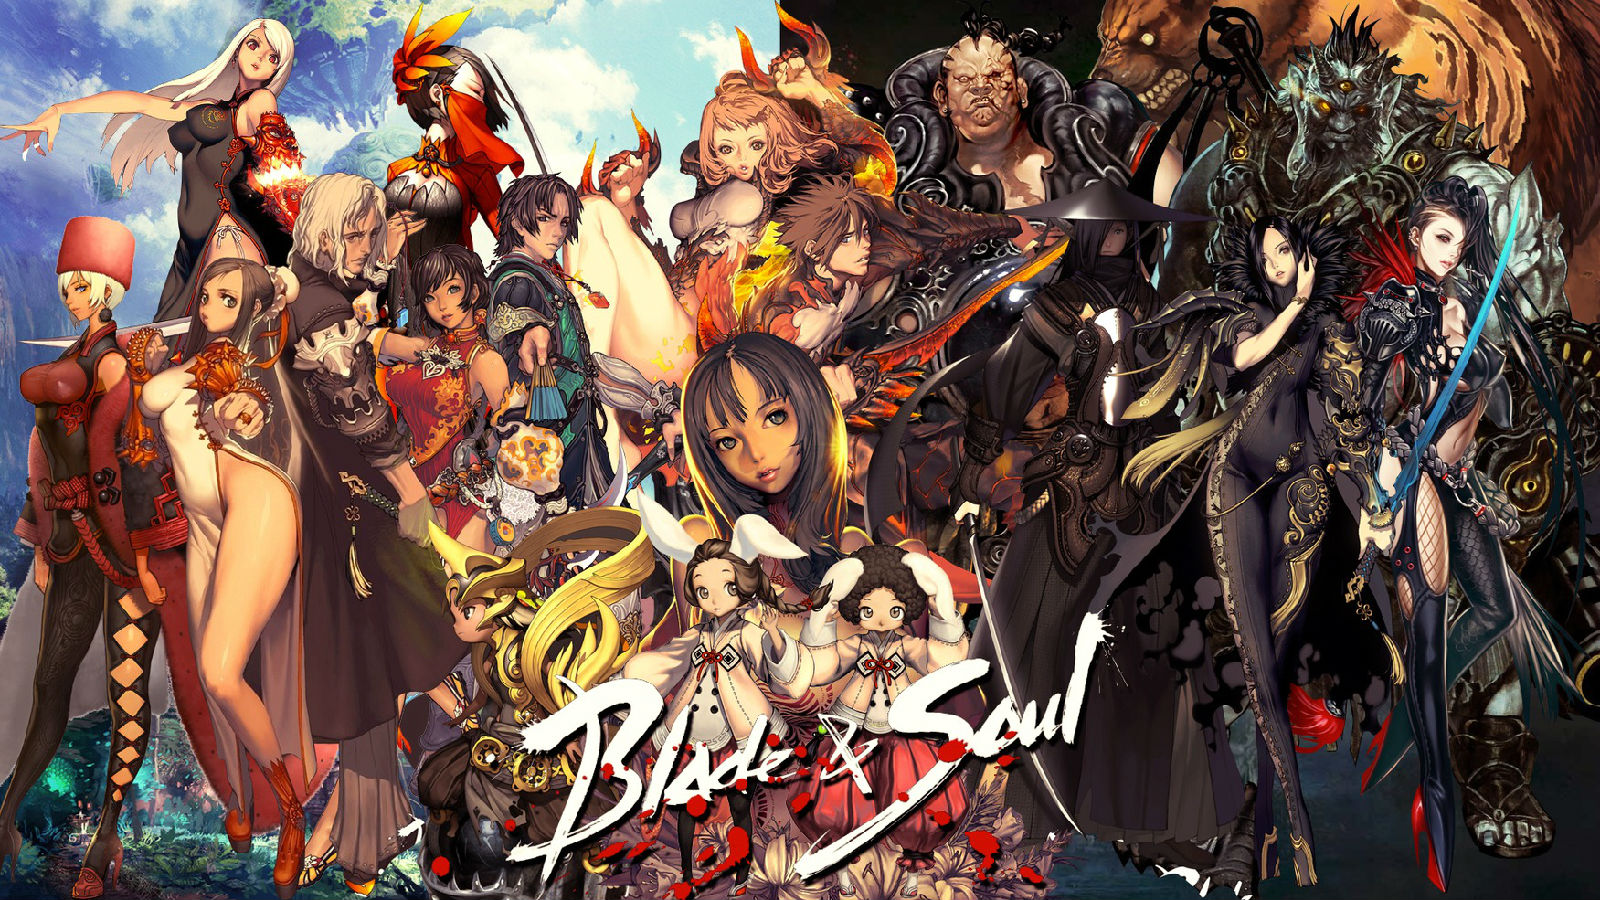 blade and soul bot 2018